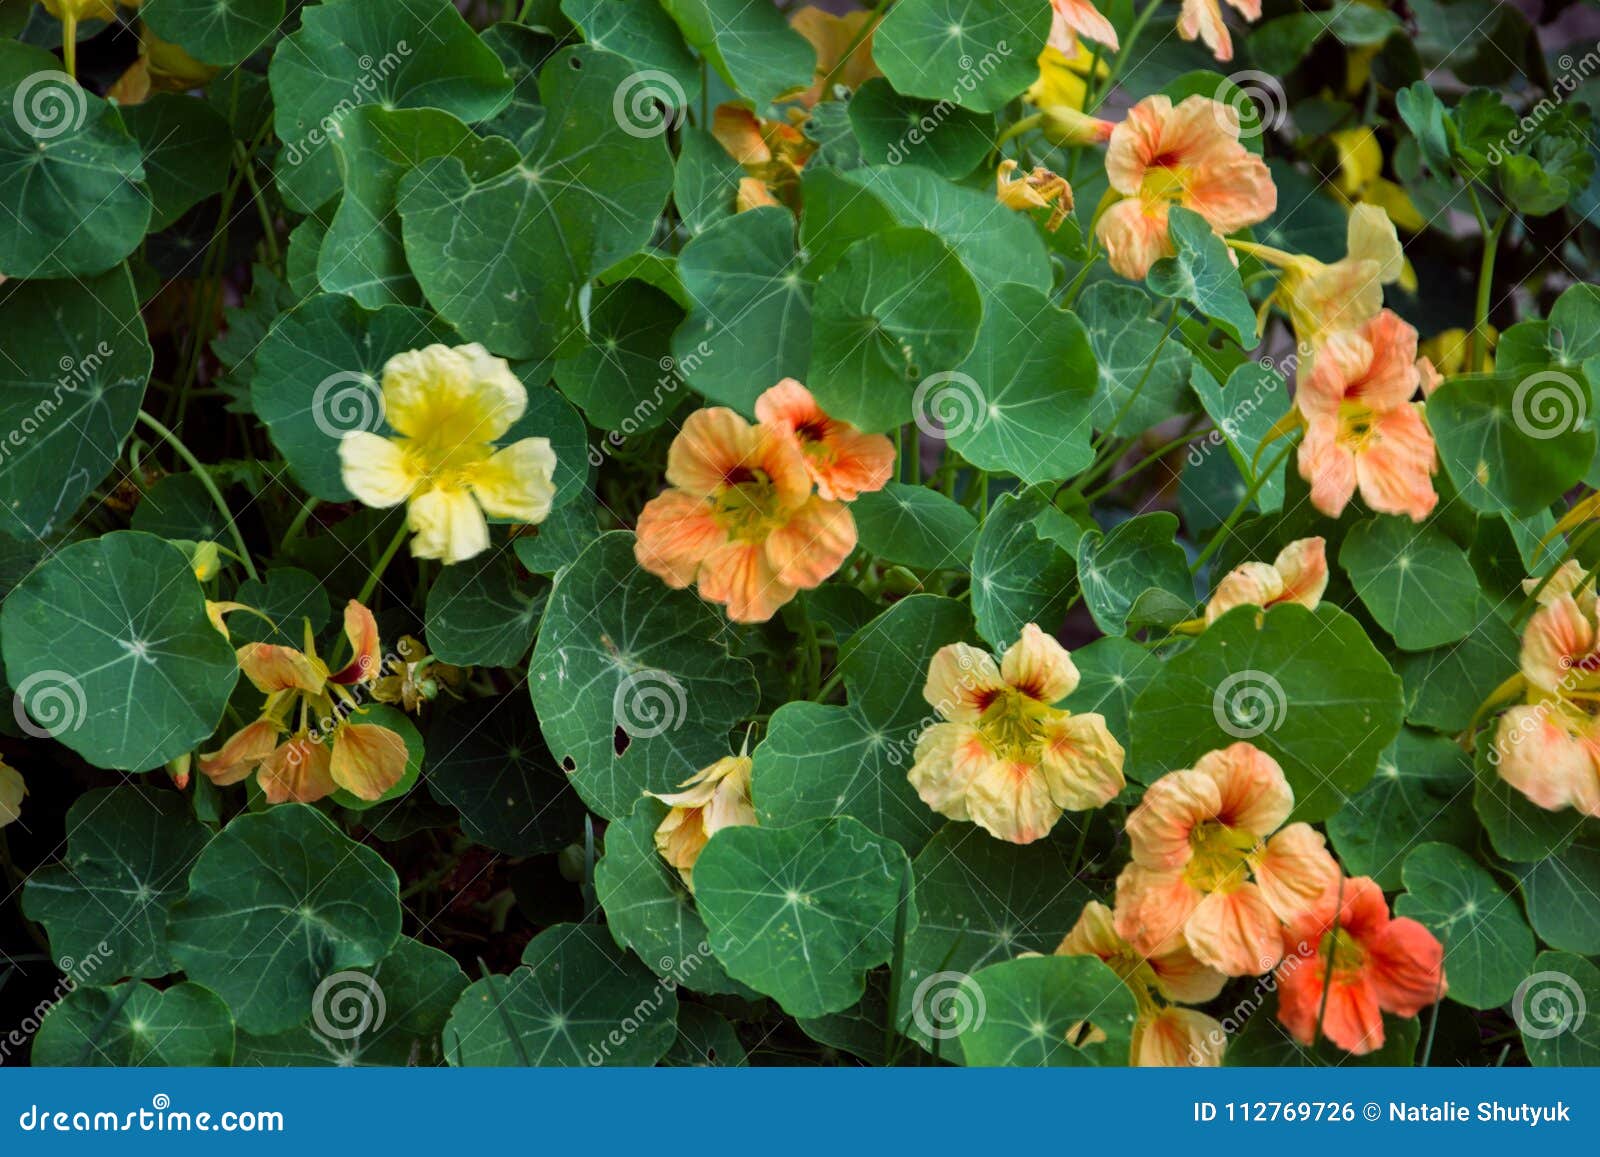 Nasturtium Large Country House Flowers For Garden Stock Photo Image Of Flowers Flowering 112769726